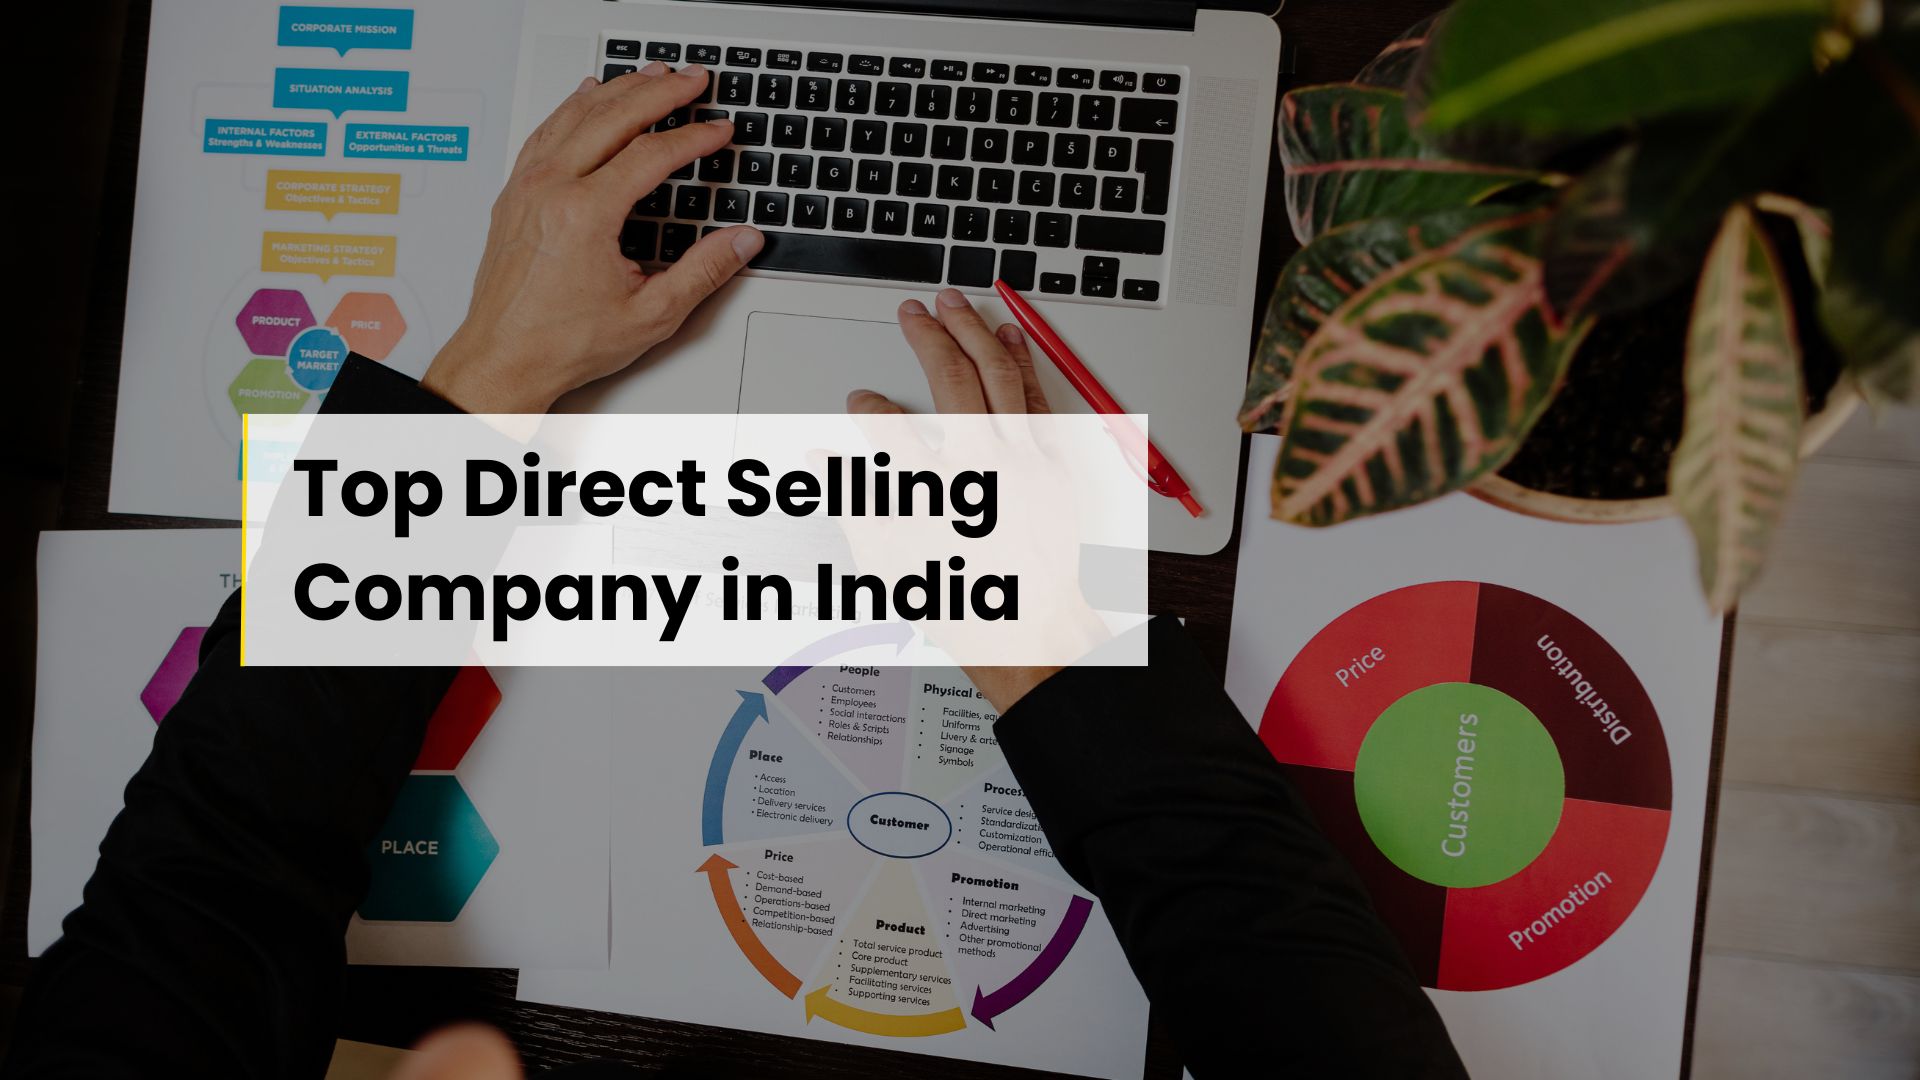 Top 10 Direct Selling Company in India